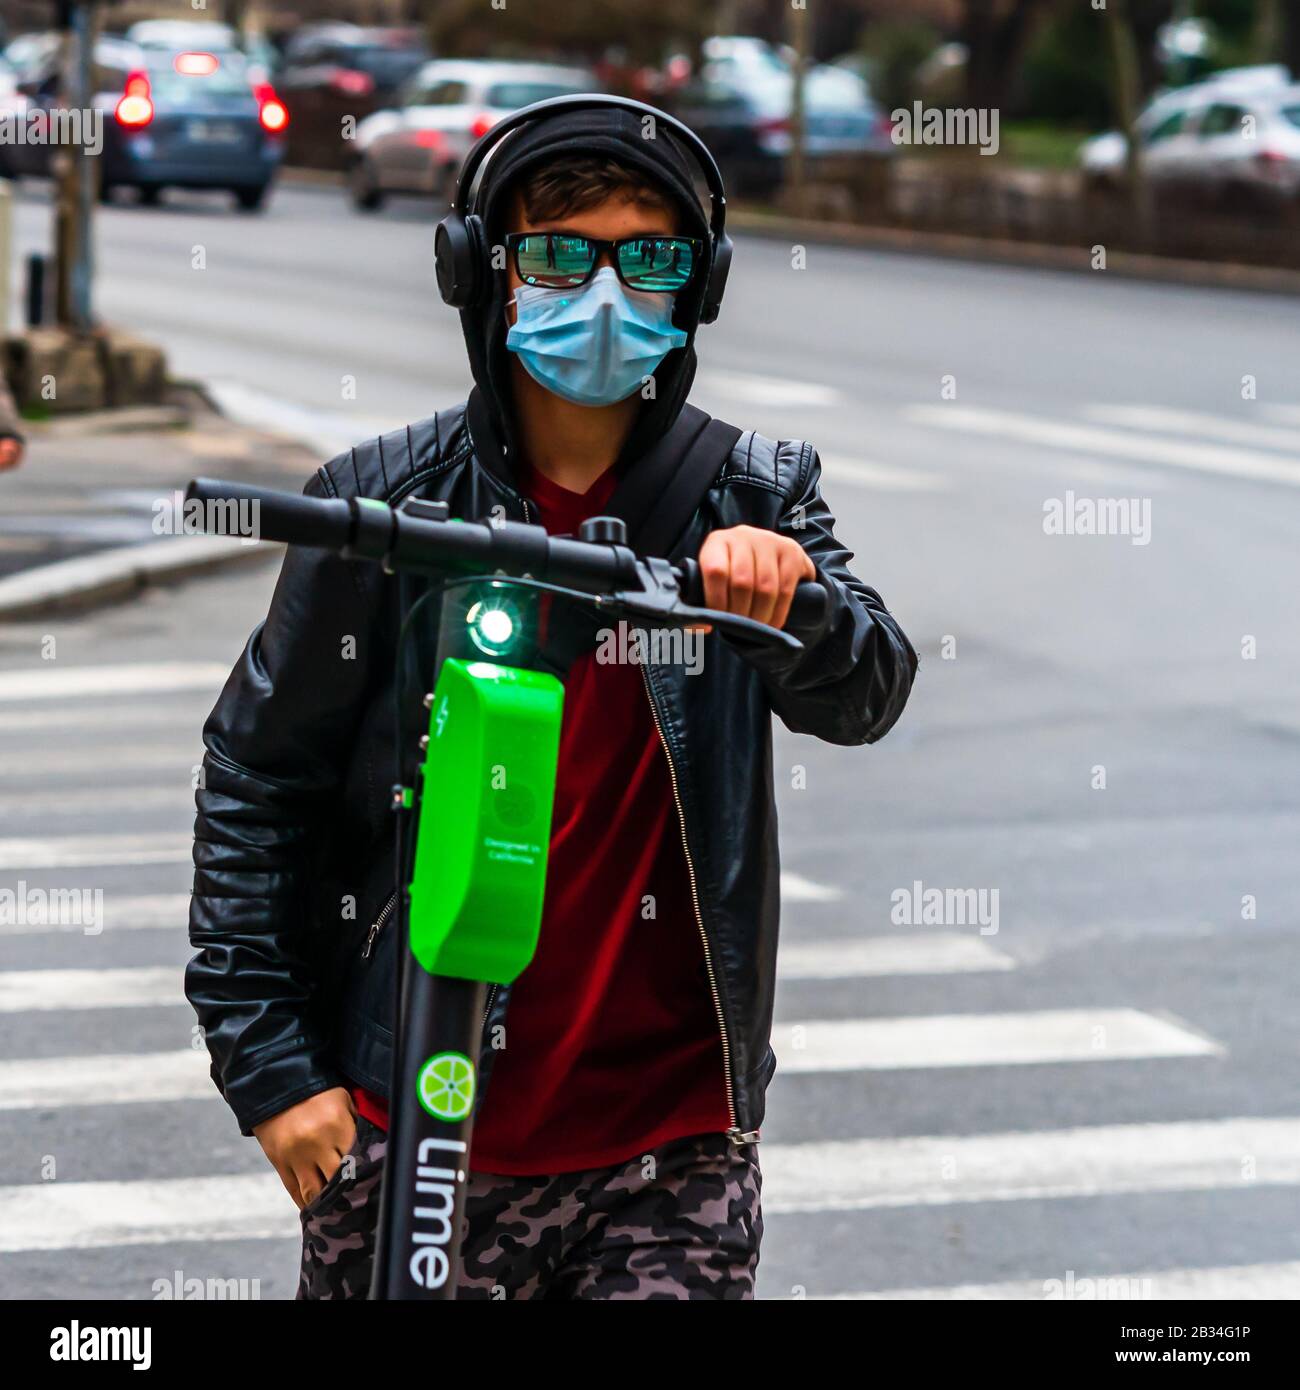 Covid-19 flu disease virus spreading in Europe. Teenager with lime scooter  wearing sunglasses and medical mask on face in Bucharest, Romania, 2020  Stock Photo - Alamy